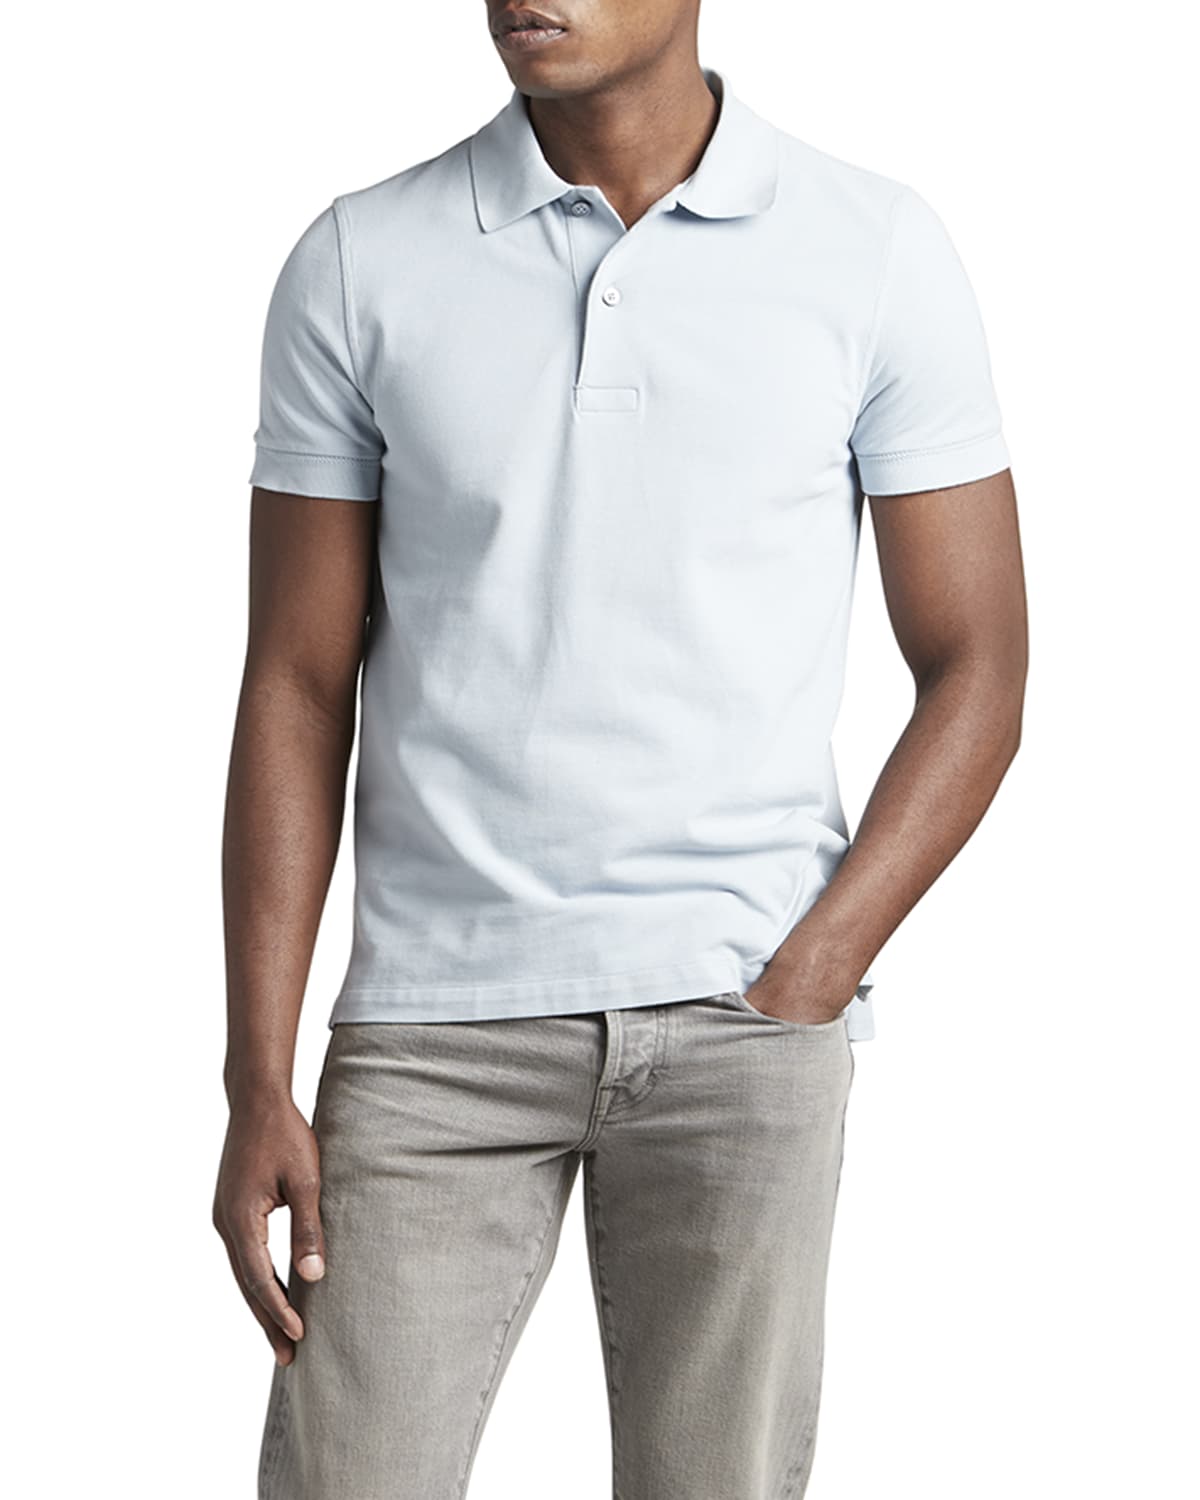 Tom Ford Polo Top | Neiman Marcus